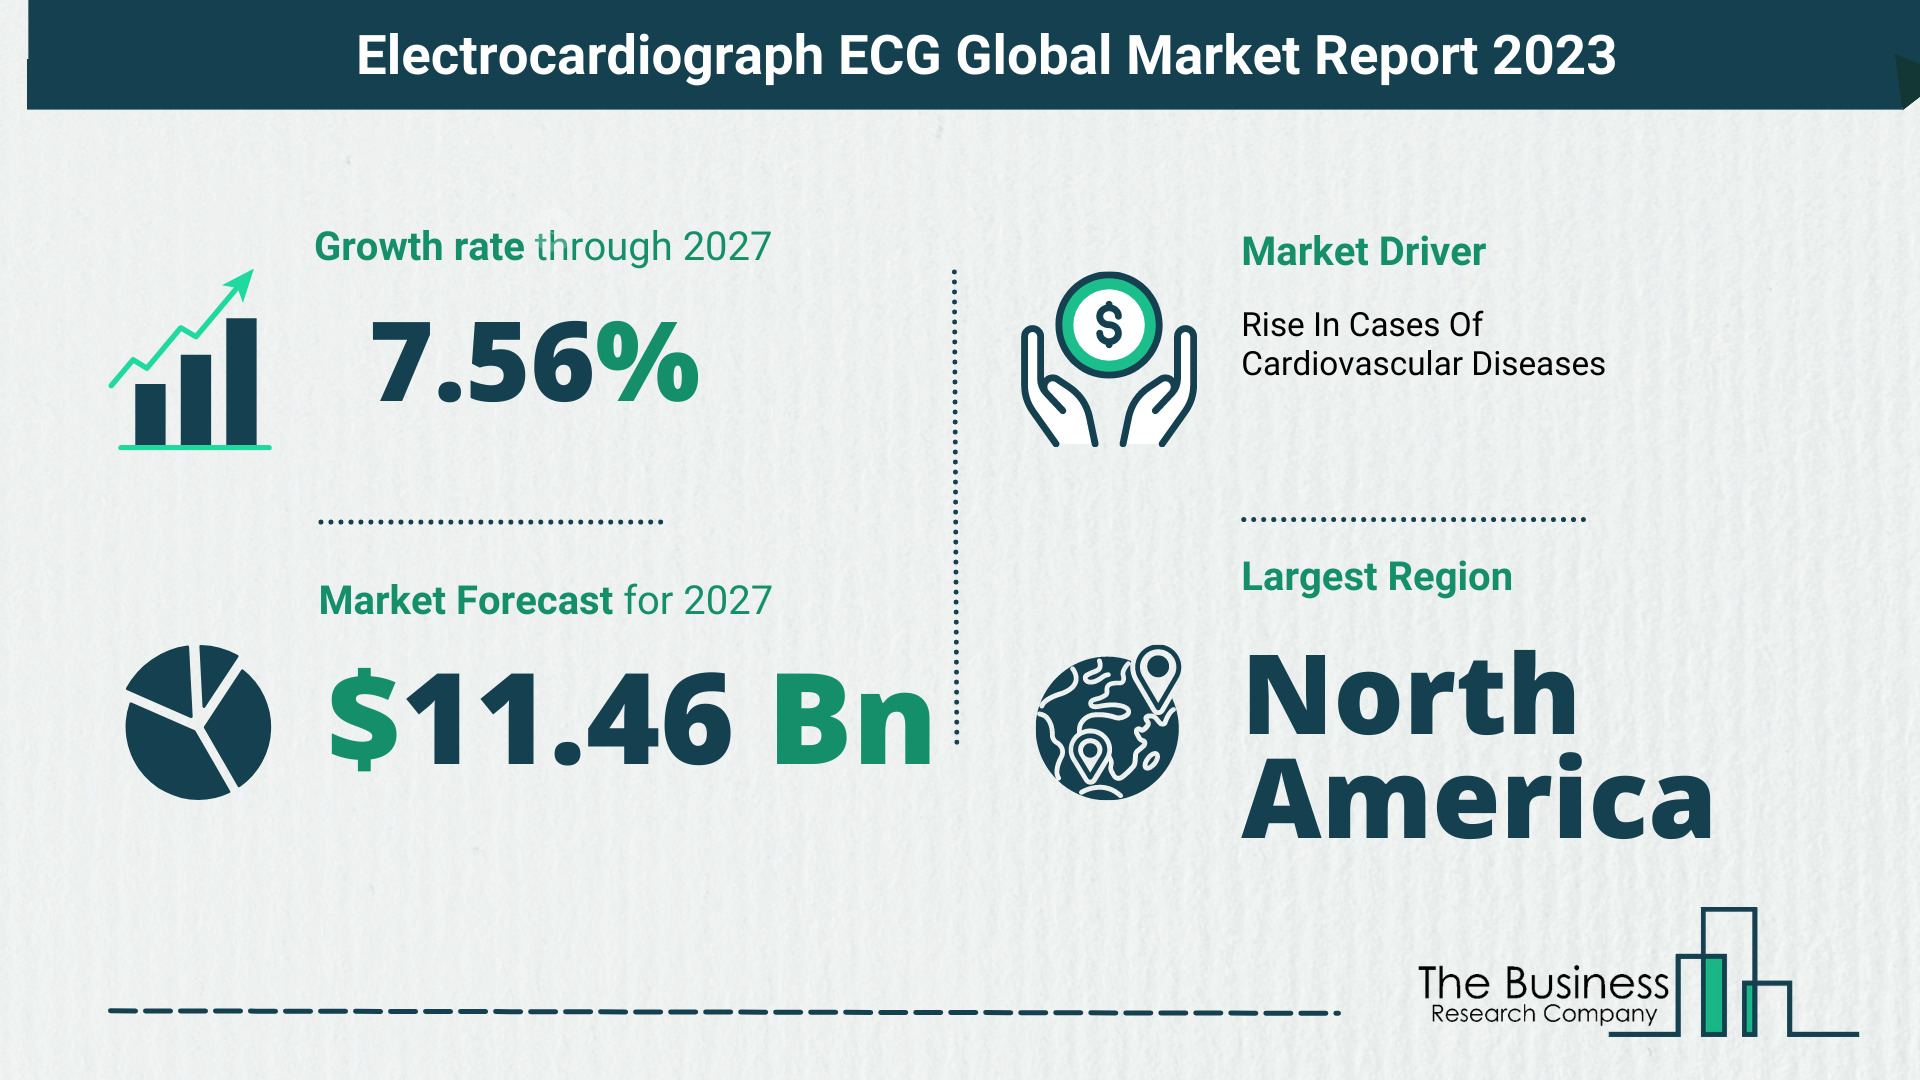 How Will The Electrocardiograph ECG Market Globally Expand In 2023?